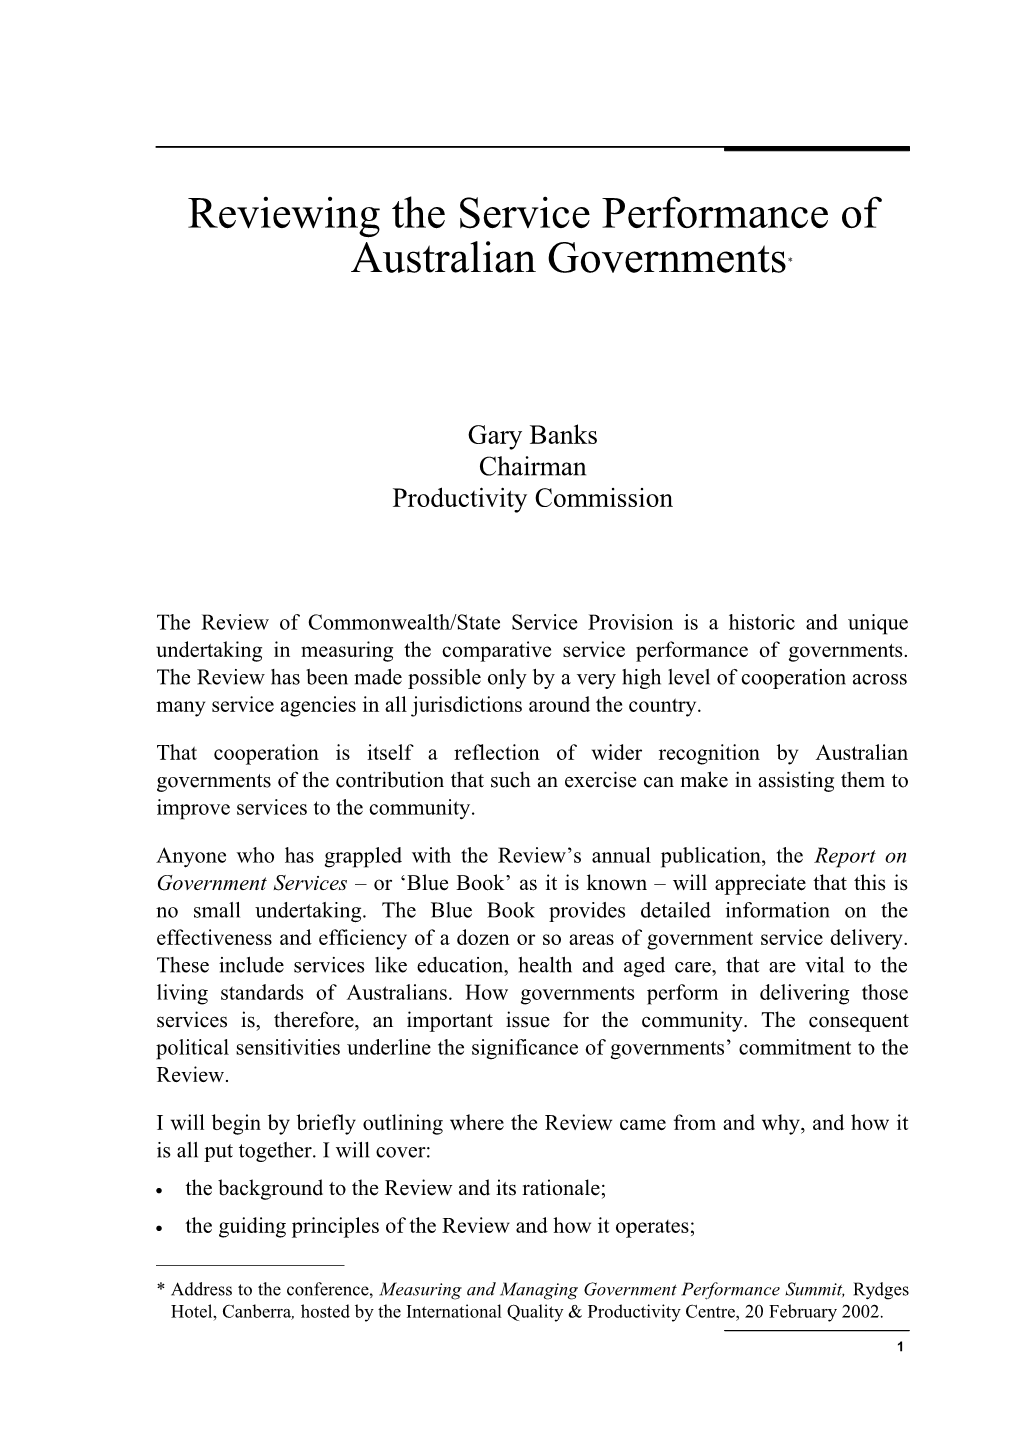 Reviewing the Service Performance of Australian Governments *